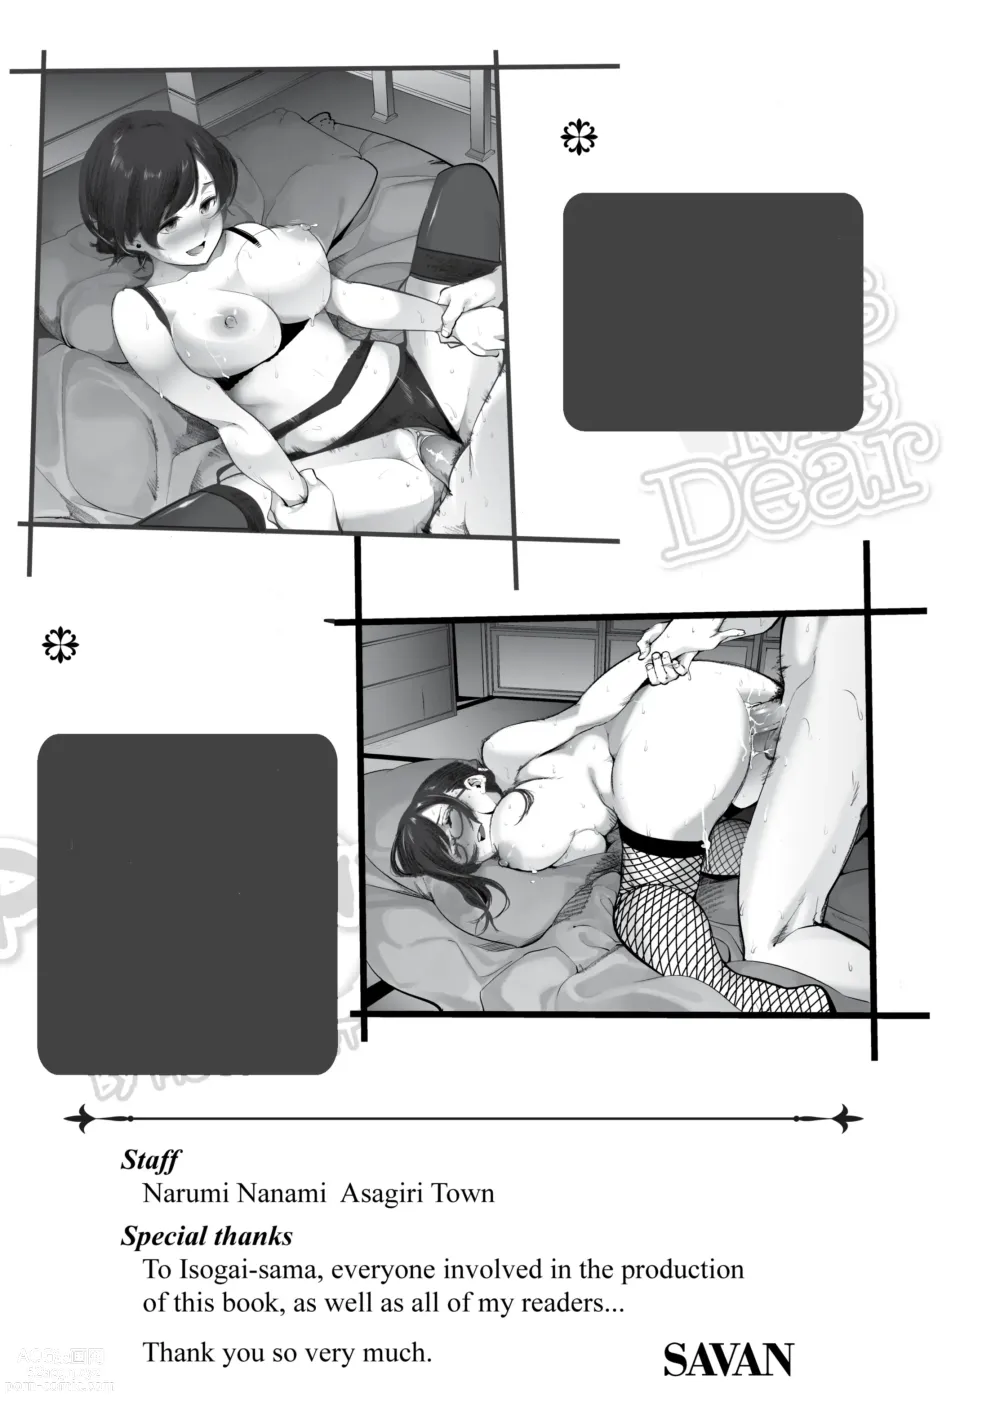 Page 216 of manga Toro Lover - Melty lover (decensored)